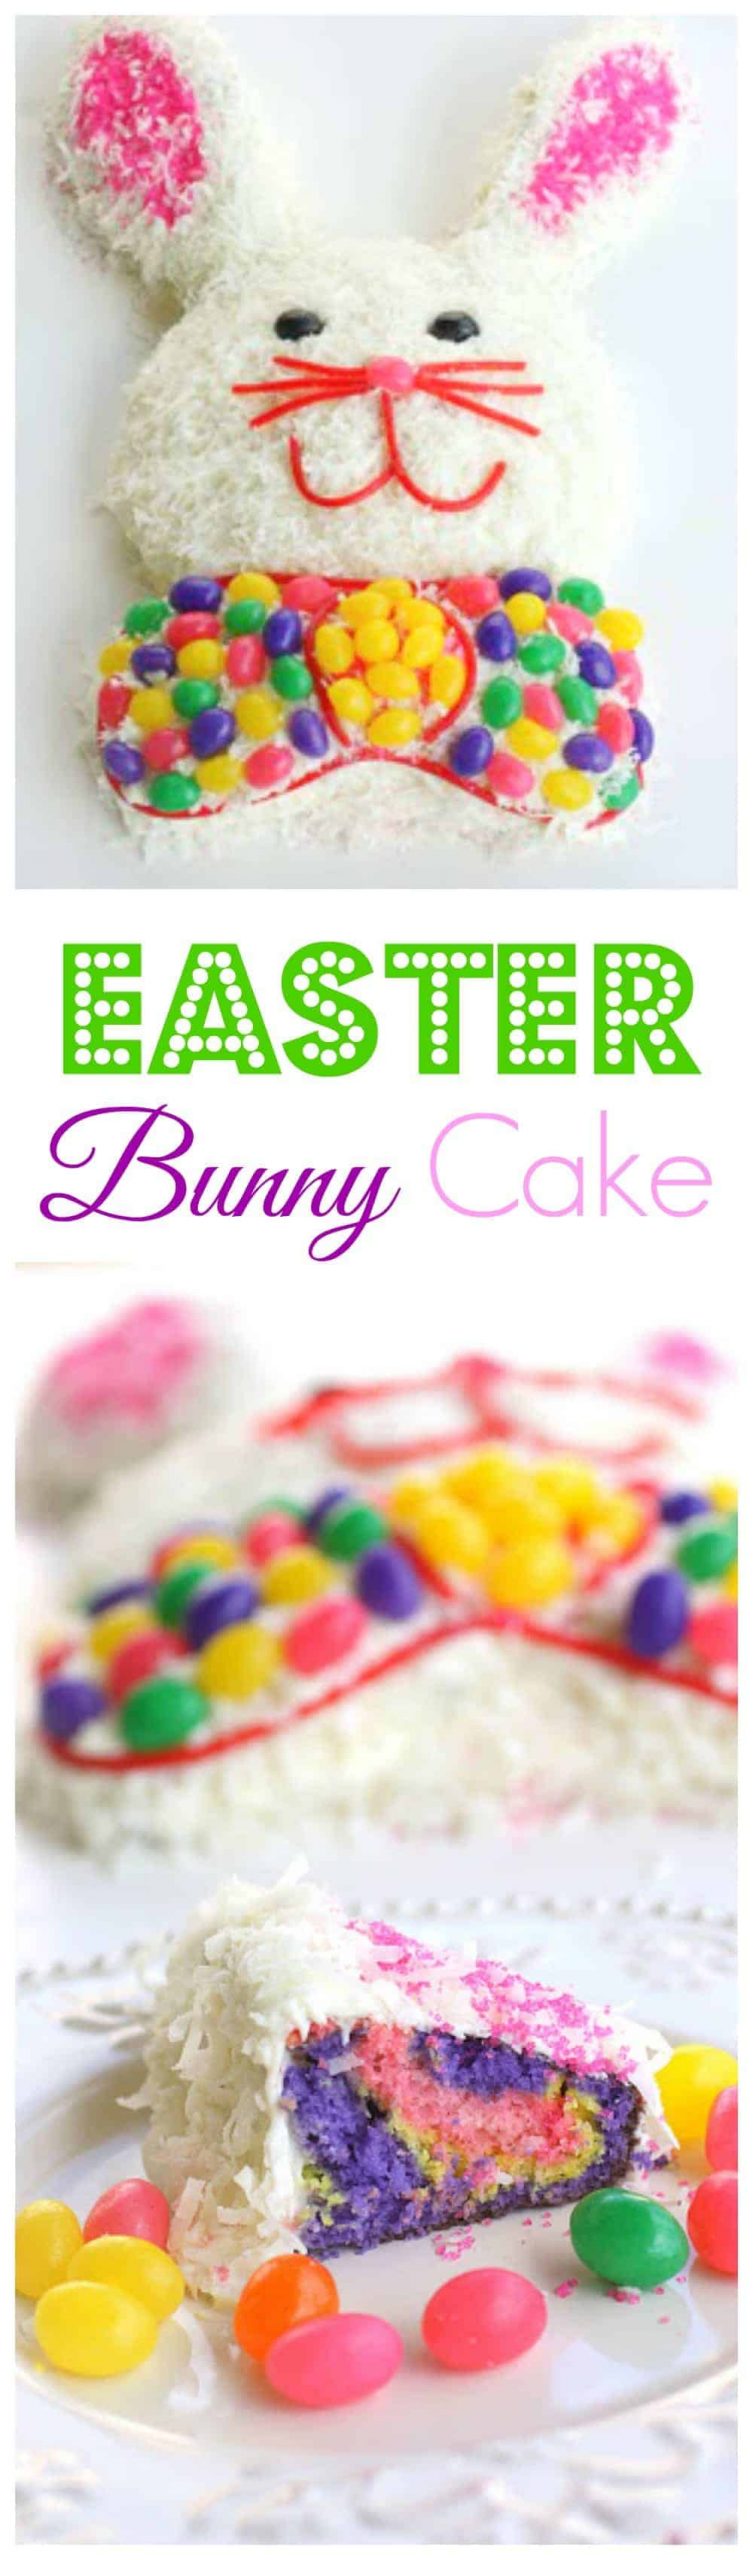 fb image scaled - Easter Bunny Cake